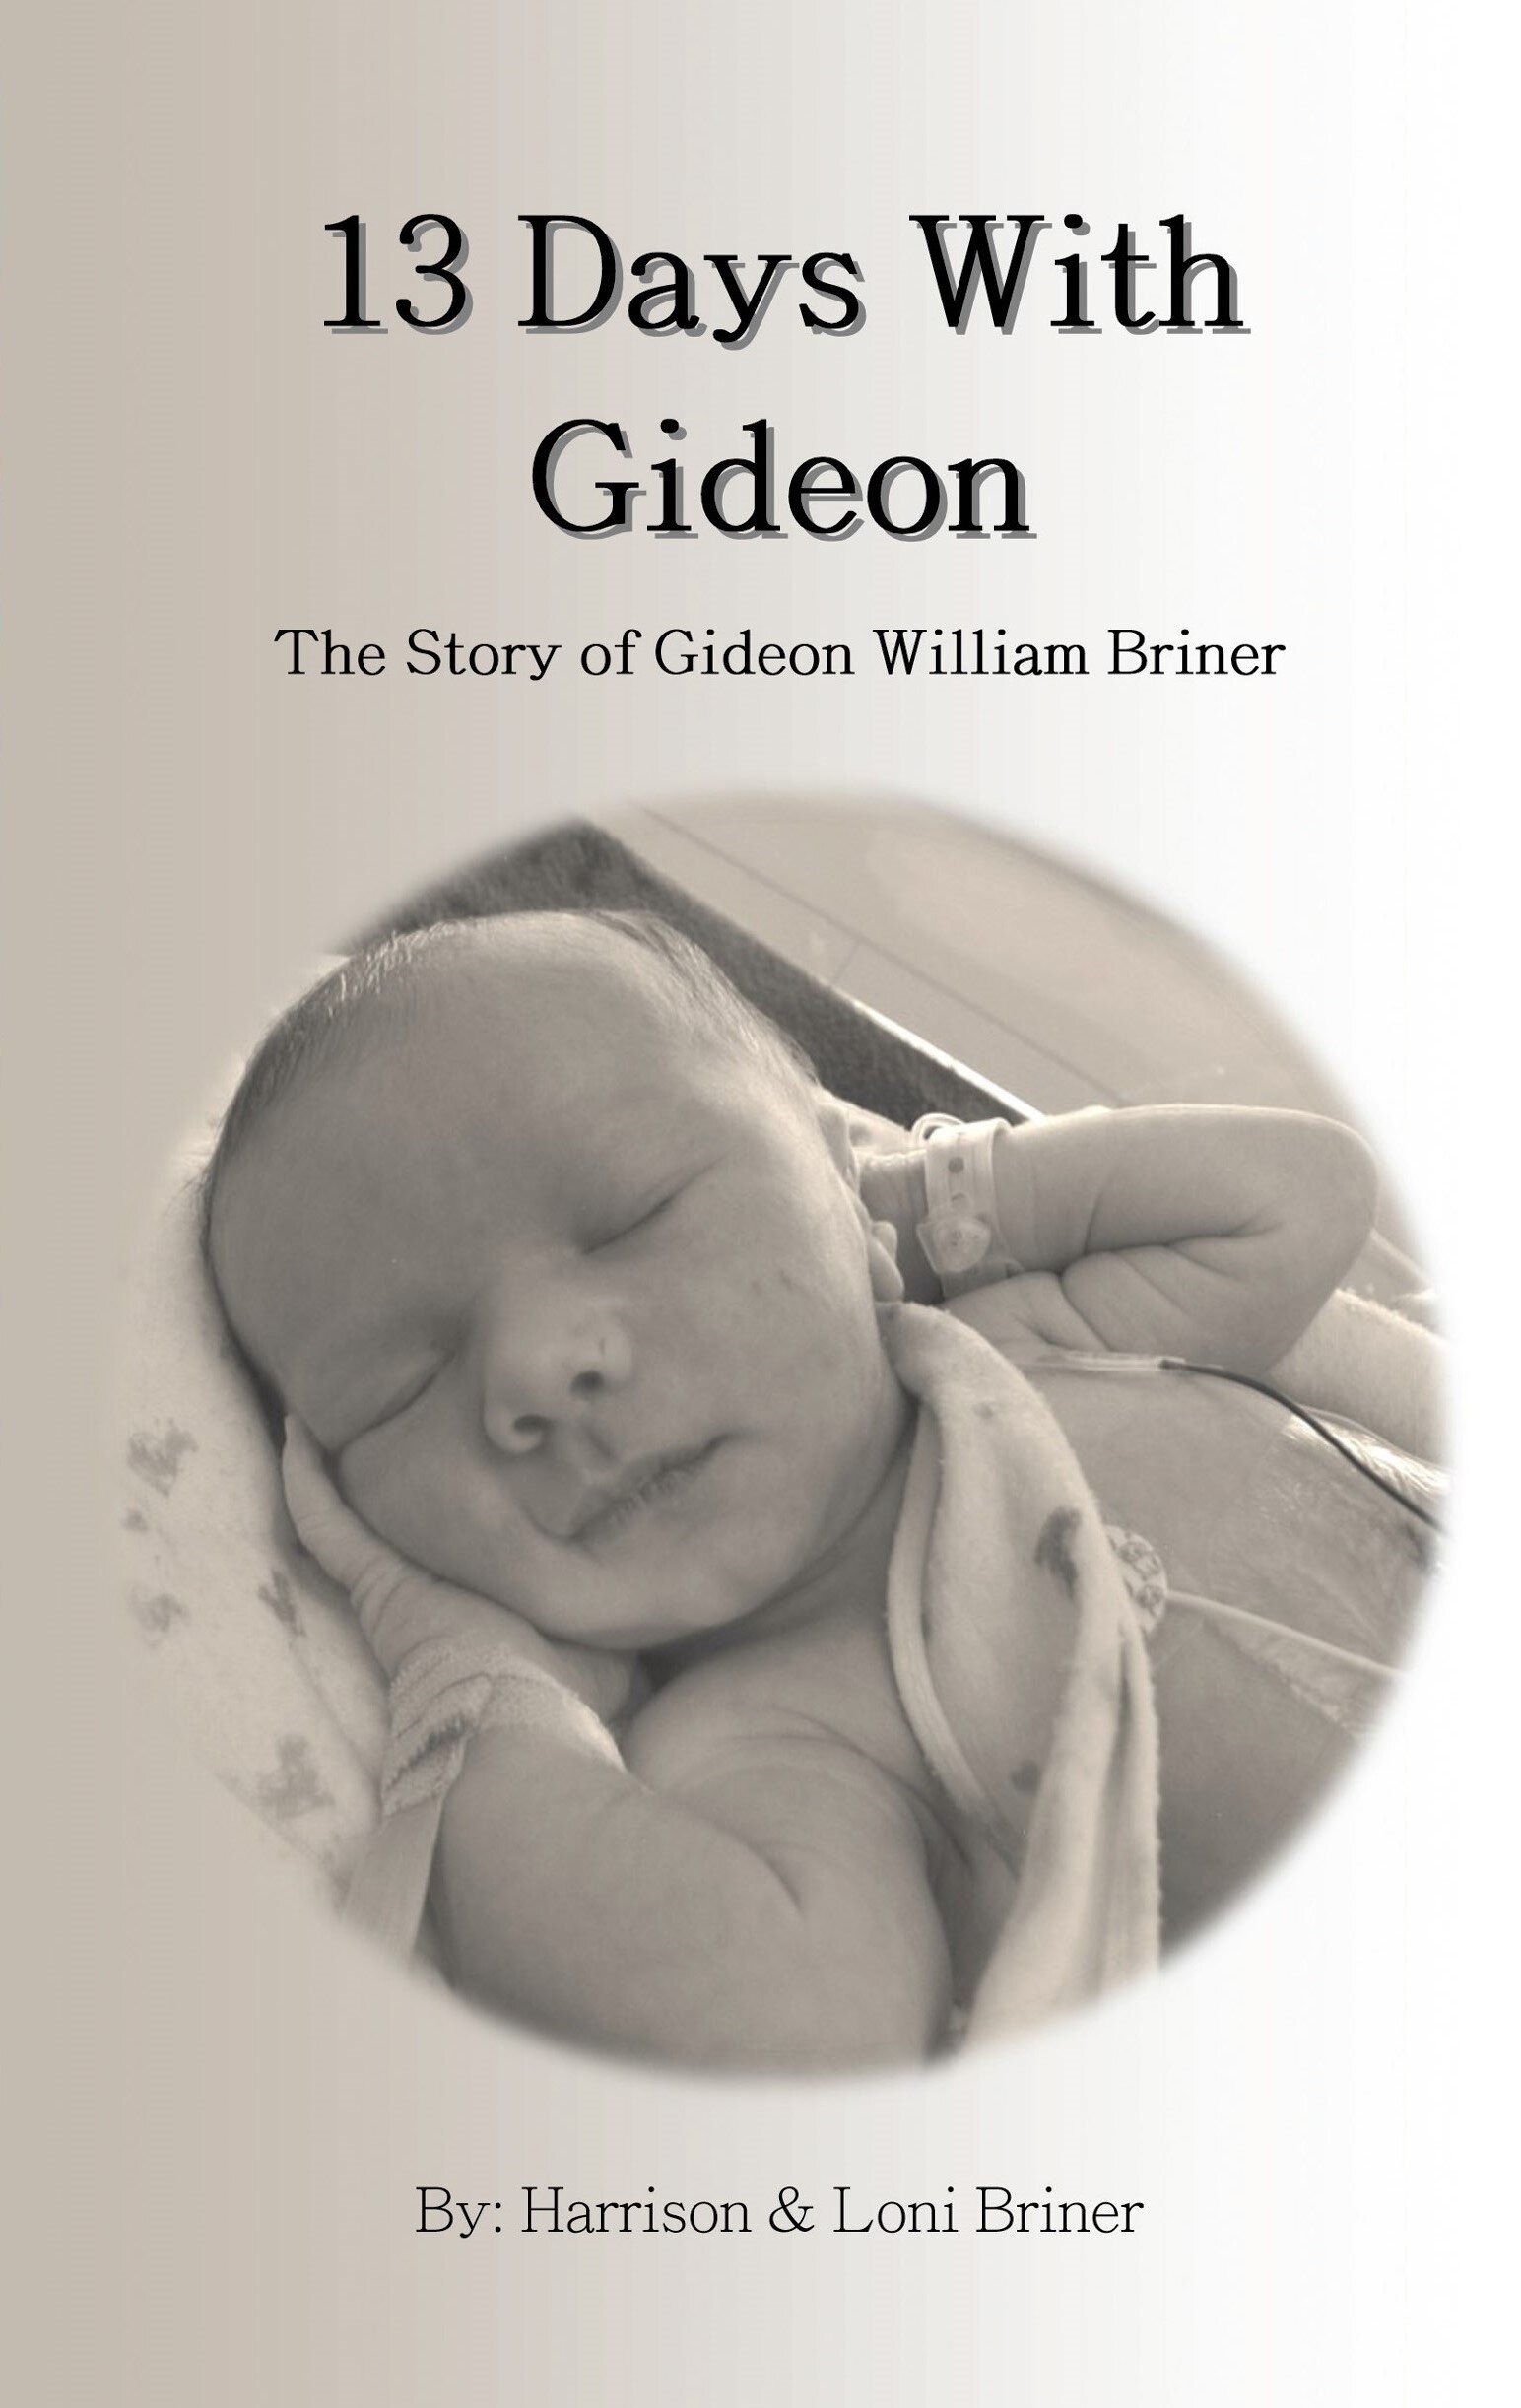 13 Days with Gideon Front.jpg